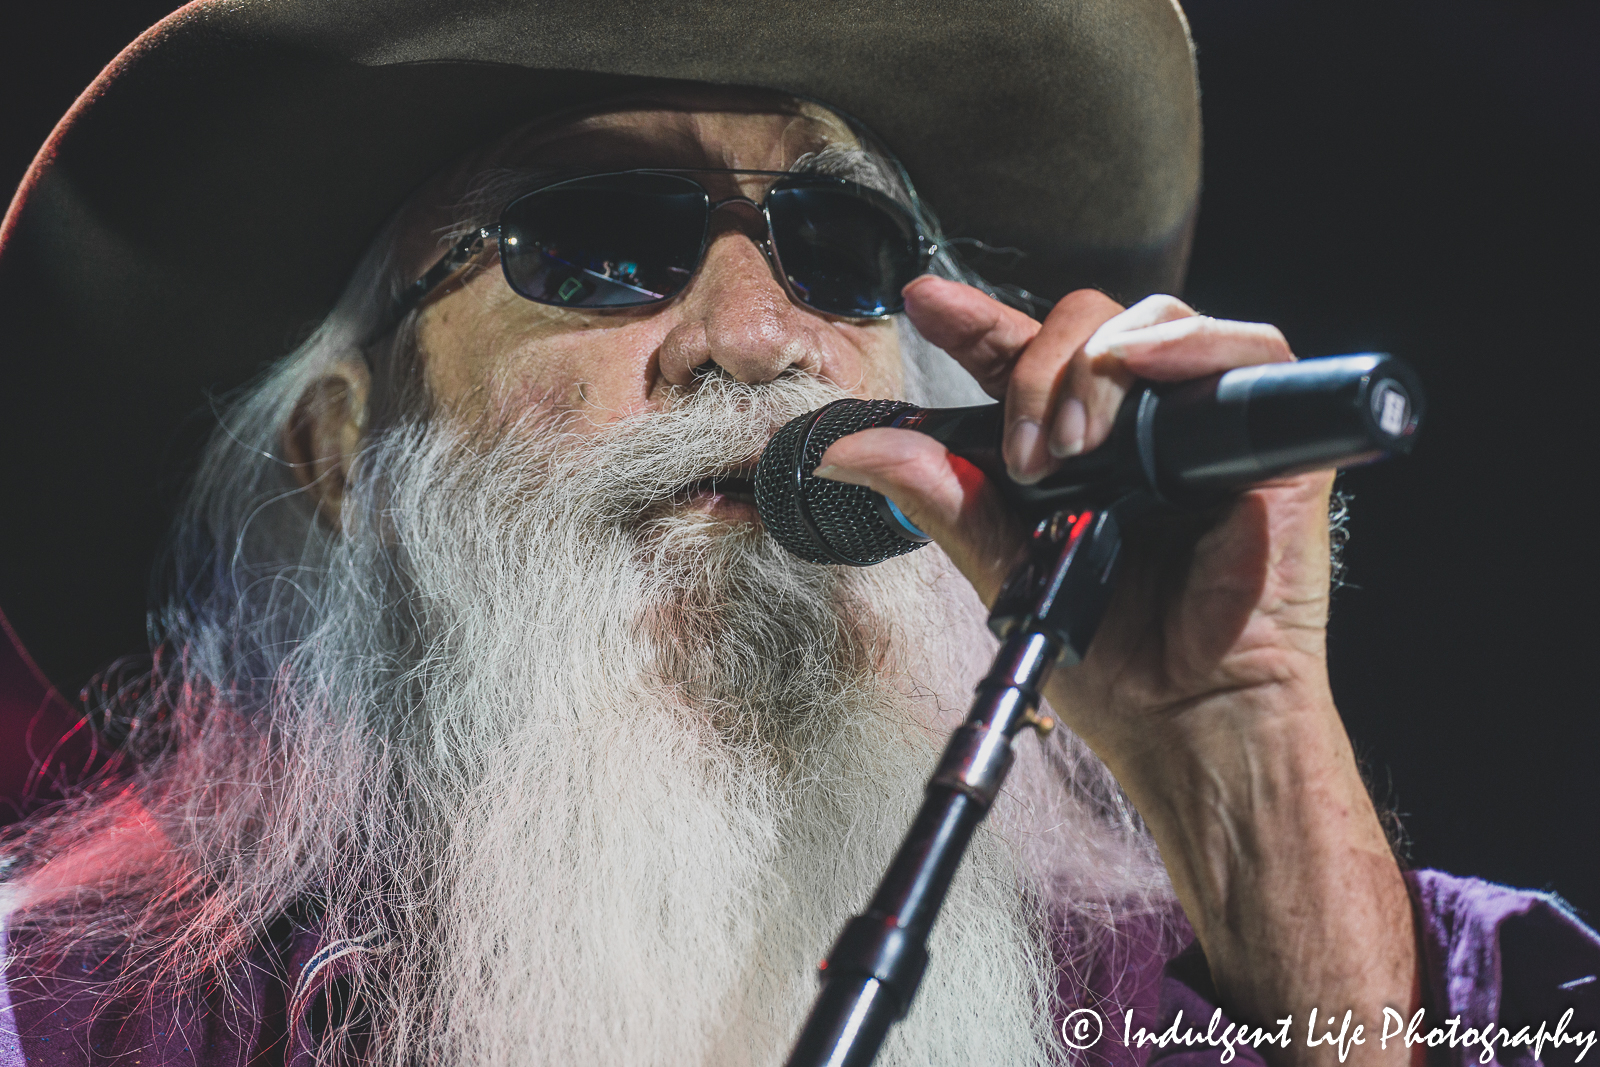 Baritone singer William Lee Golden of The Oak Ridge Boys performing live in concert at Star Pavilion inside of Ameristar Casino in Kansas City, MO on July 15, 2022.